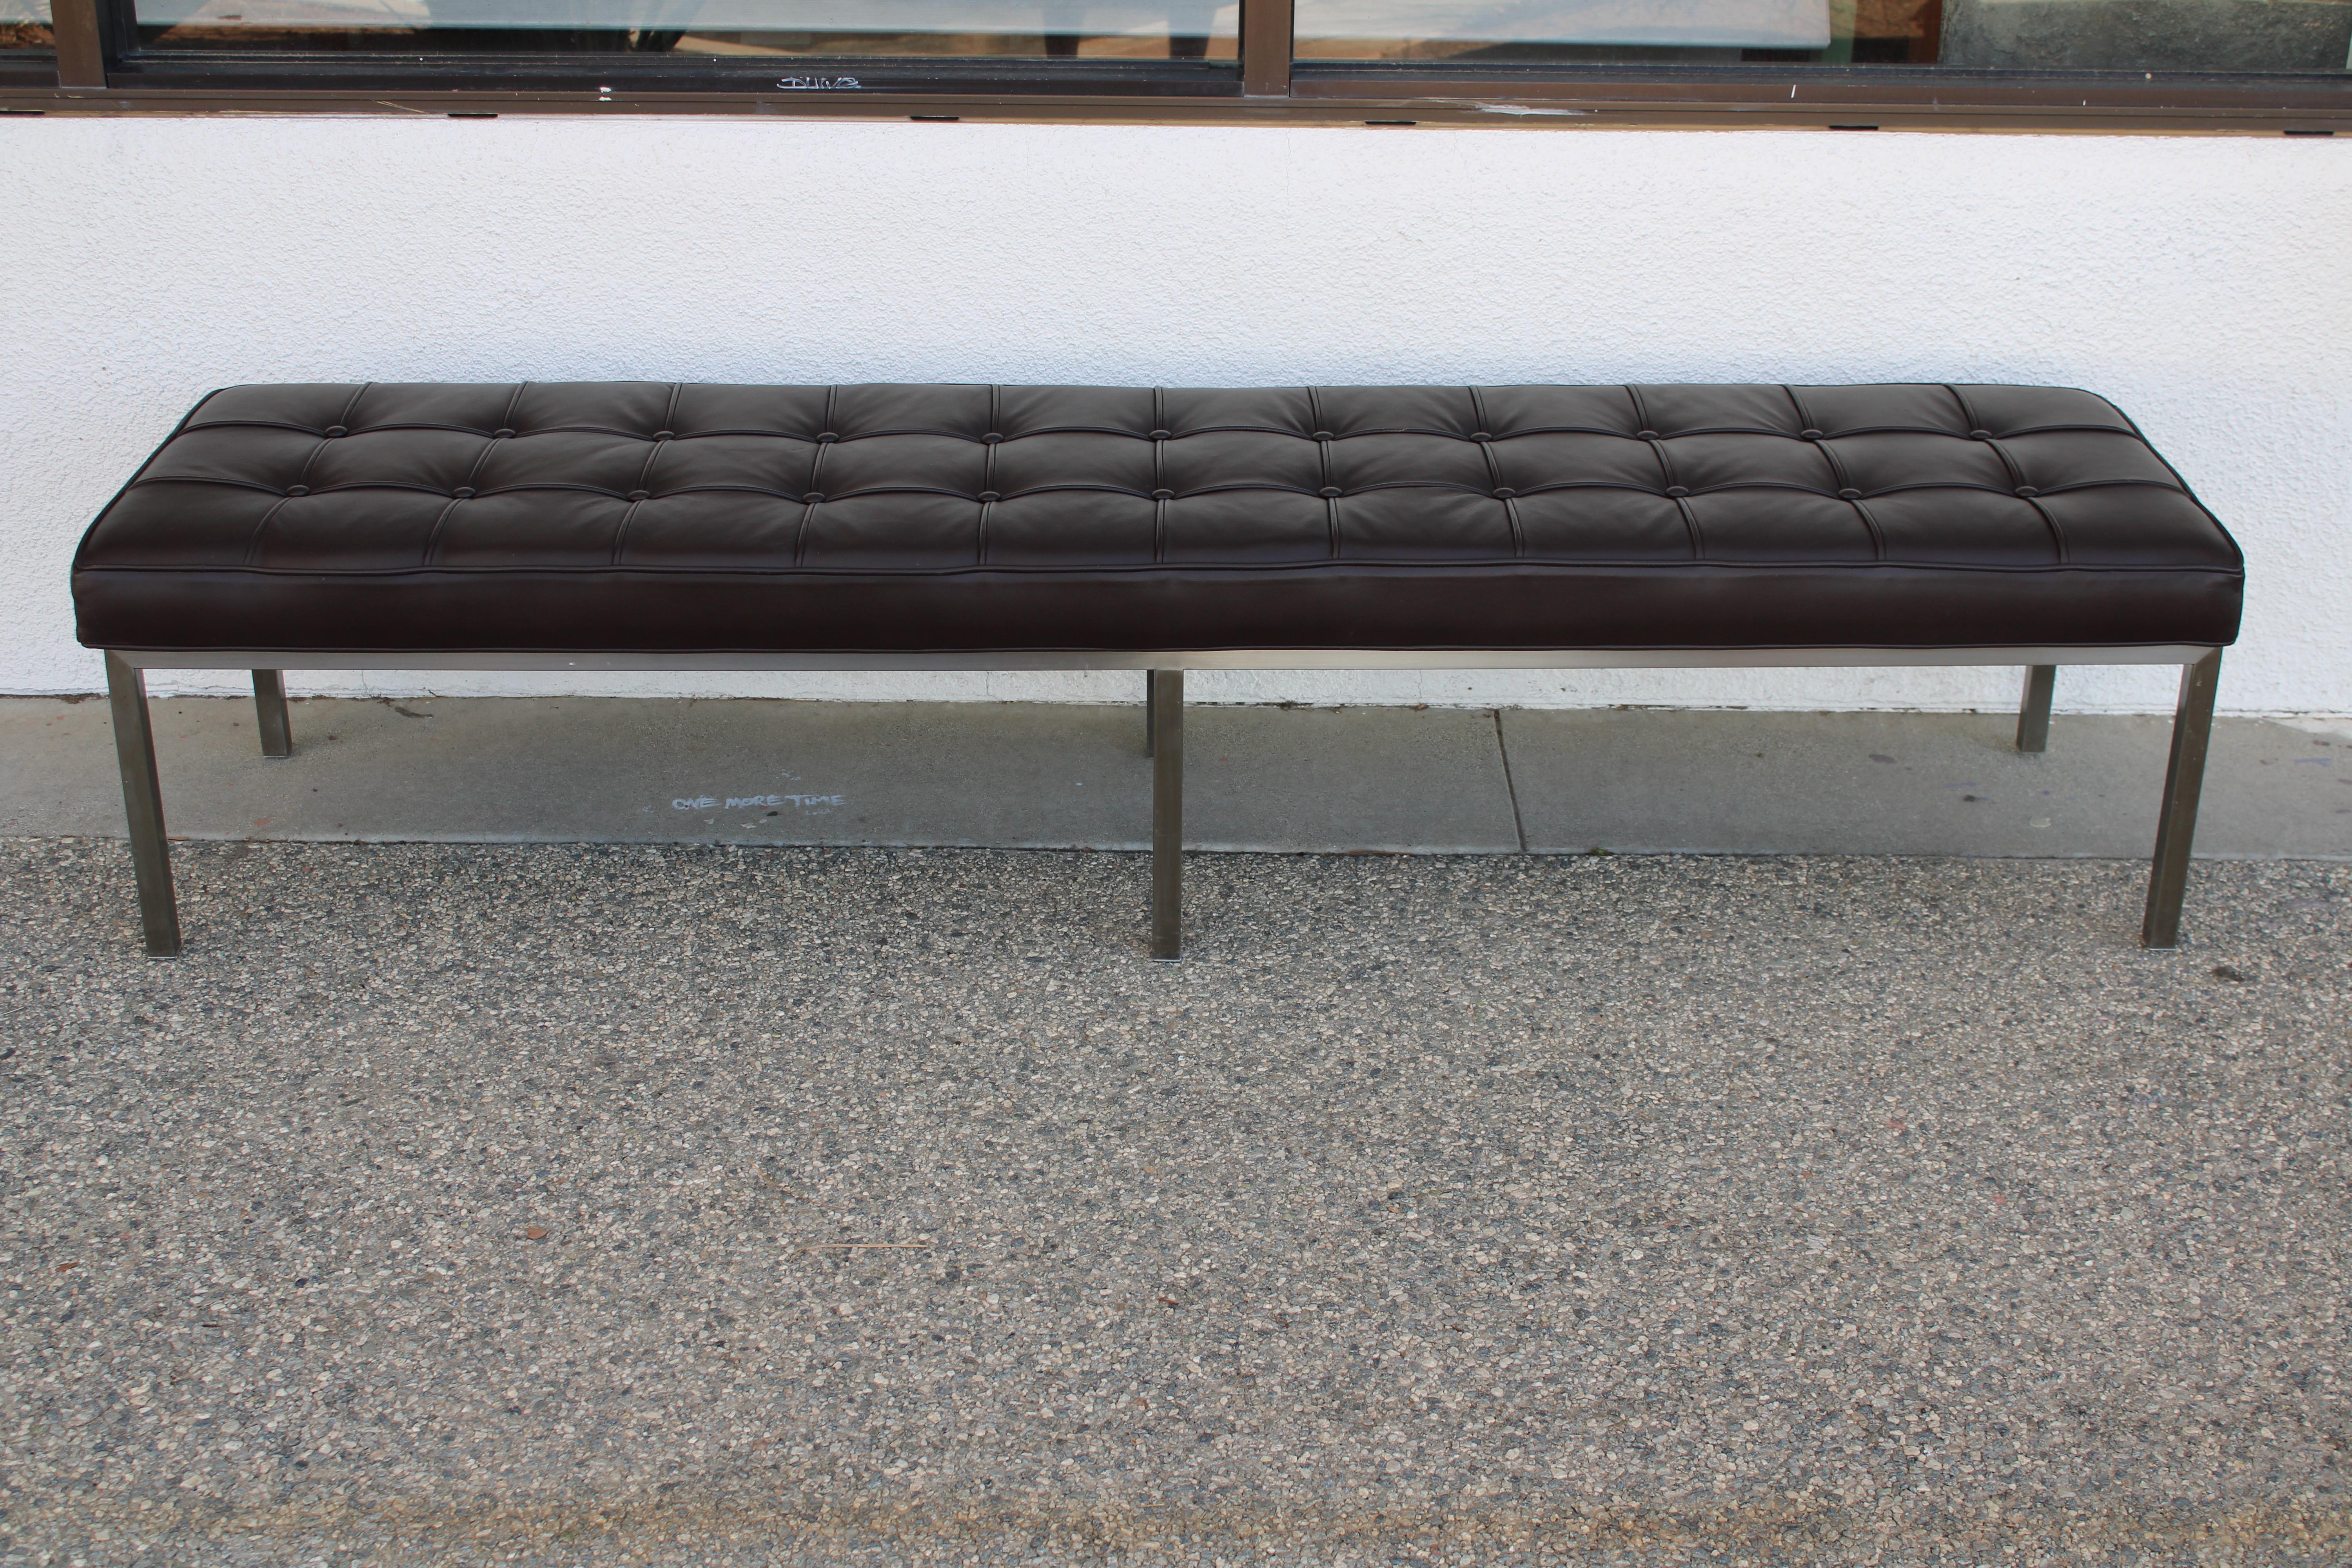 Aluminum with chocolate leather bench by Brueton Industries. Bench measures 72